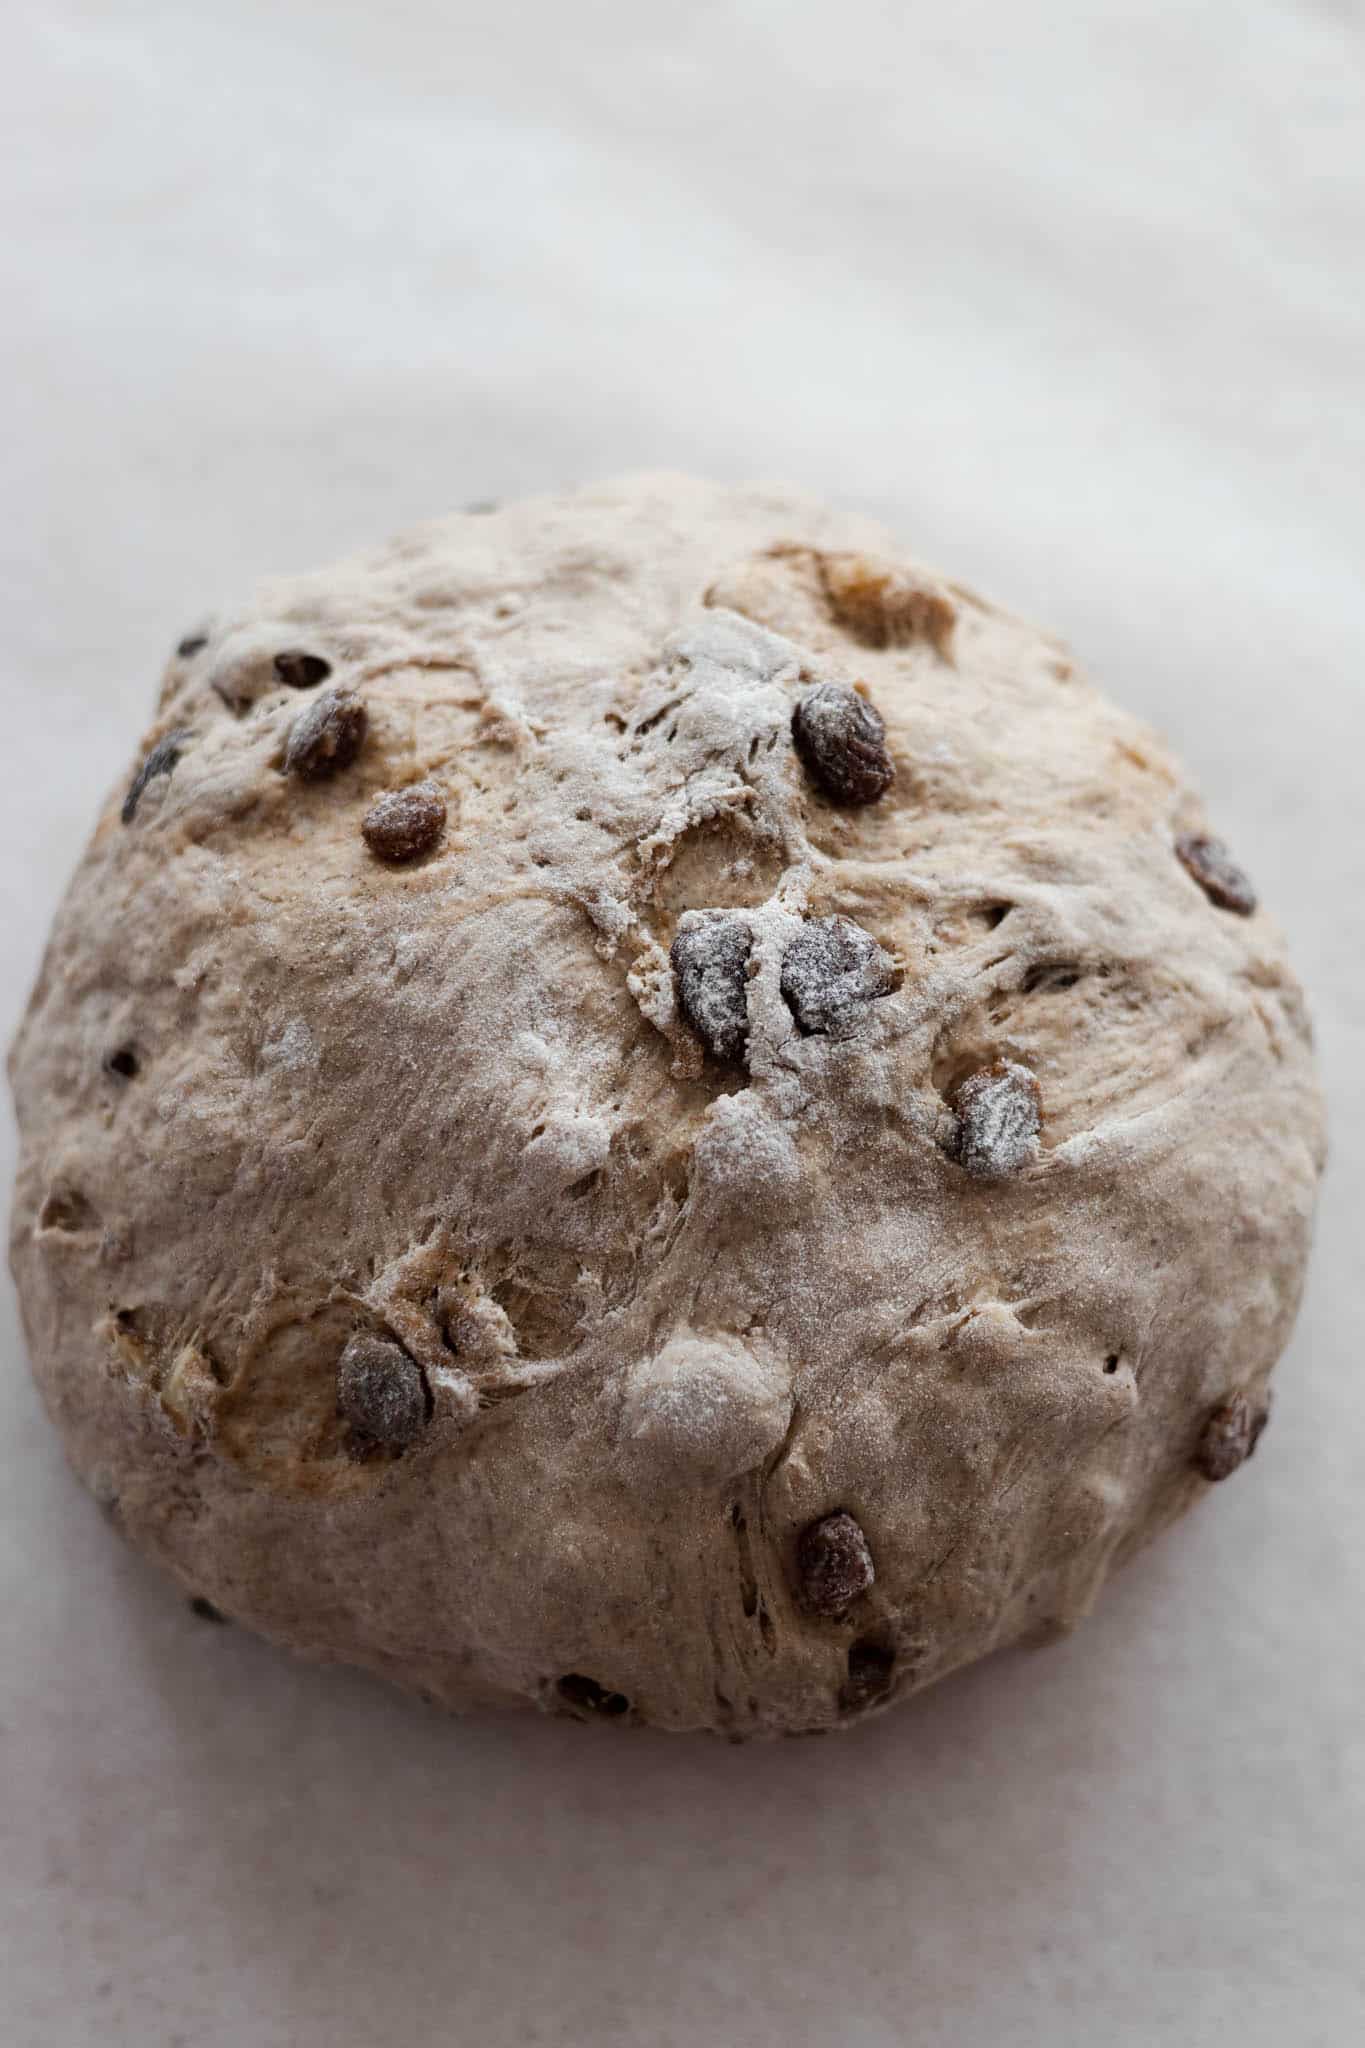 Once the dough has risen, form it into a ball and transfer to parchment paper. 